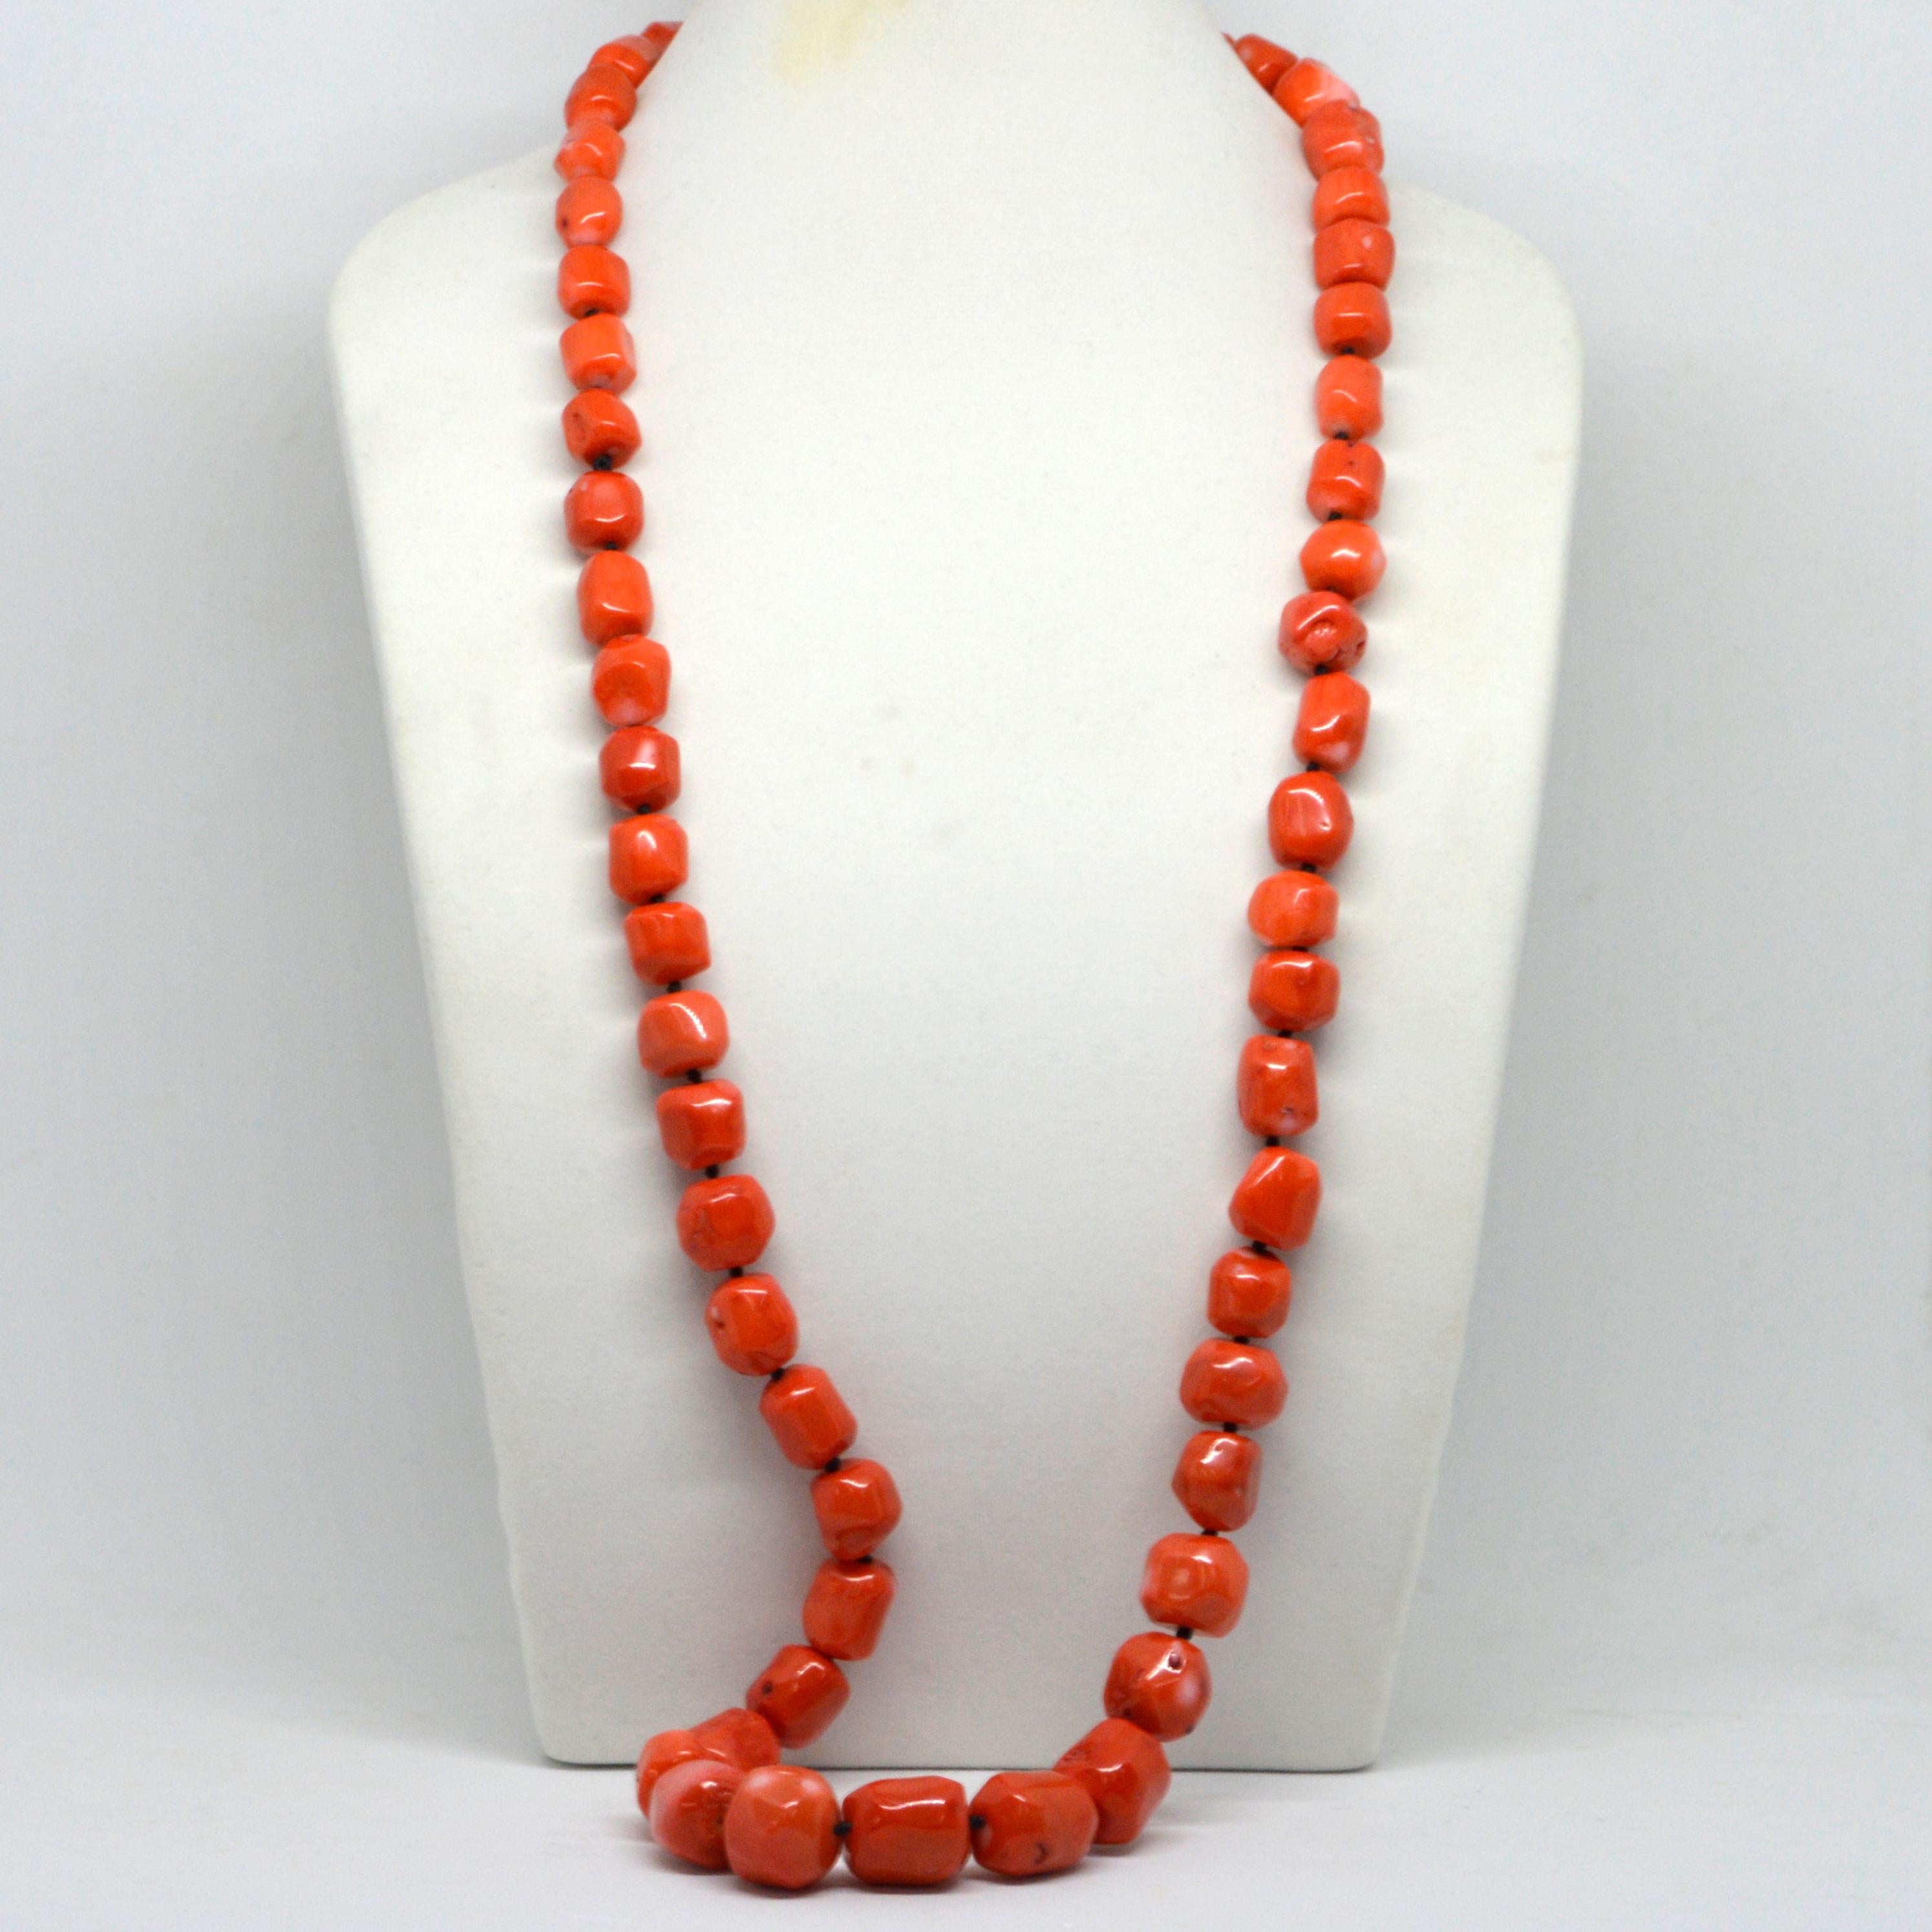 Graduated Orange Sea Bamboo Coral nuggets hand knotted on Black Thread.

Coral Graduated from 12-21mm
Total Necklace Length 94cm / 37 inches
Weight 286.63gr